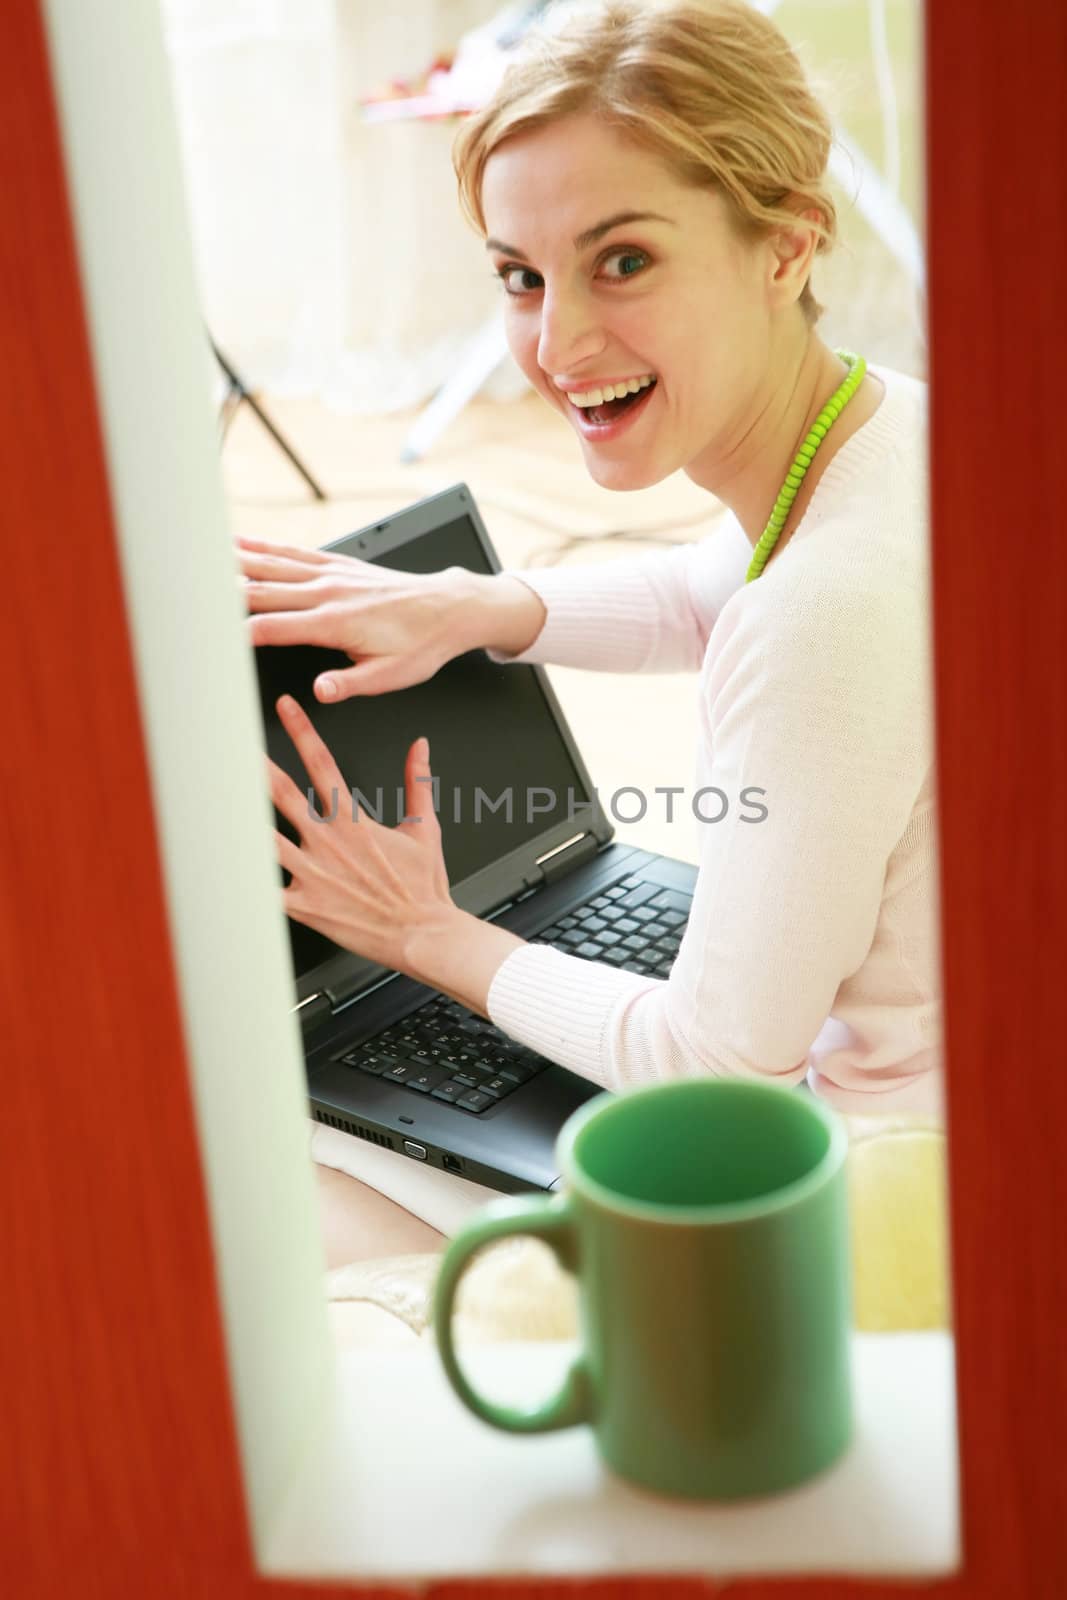 An image of a girl with a laptop